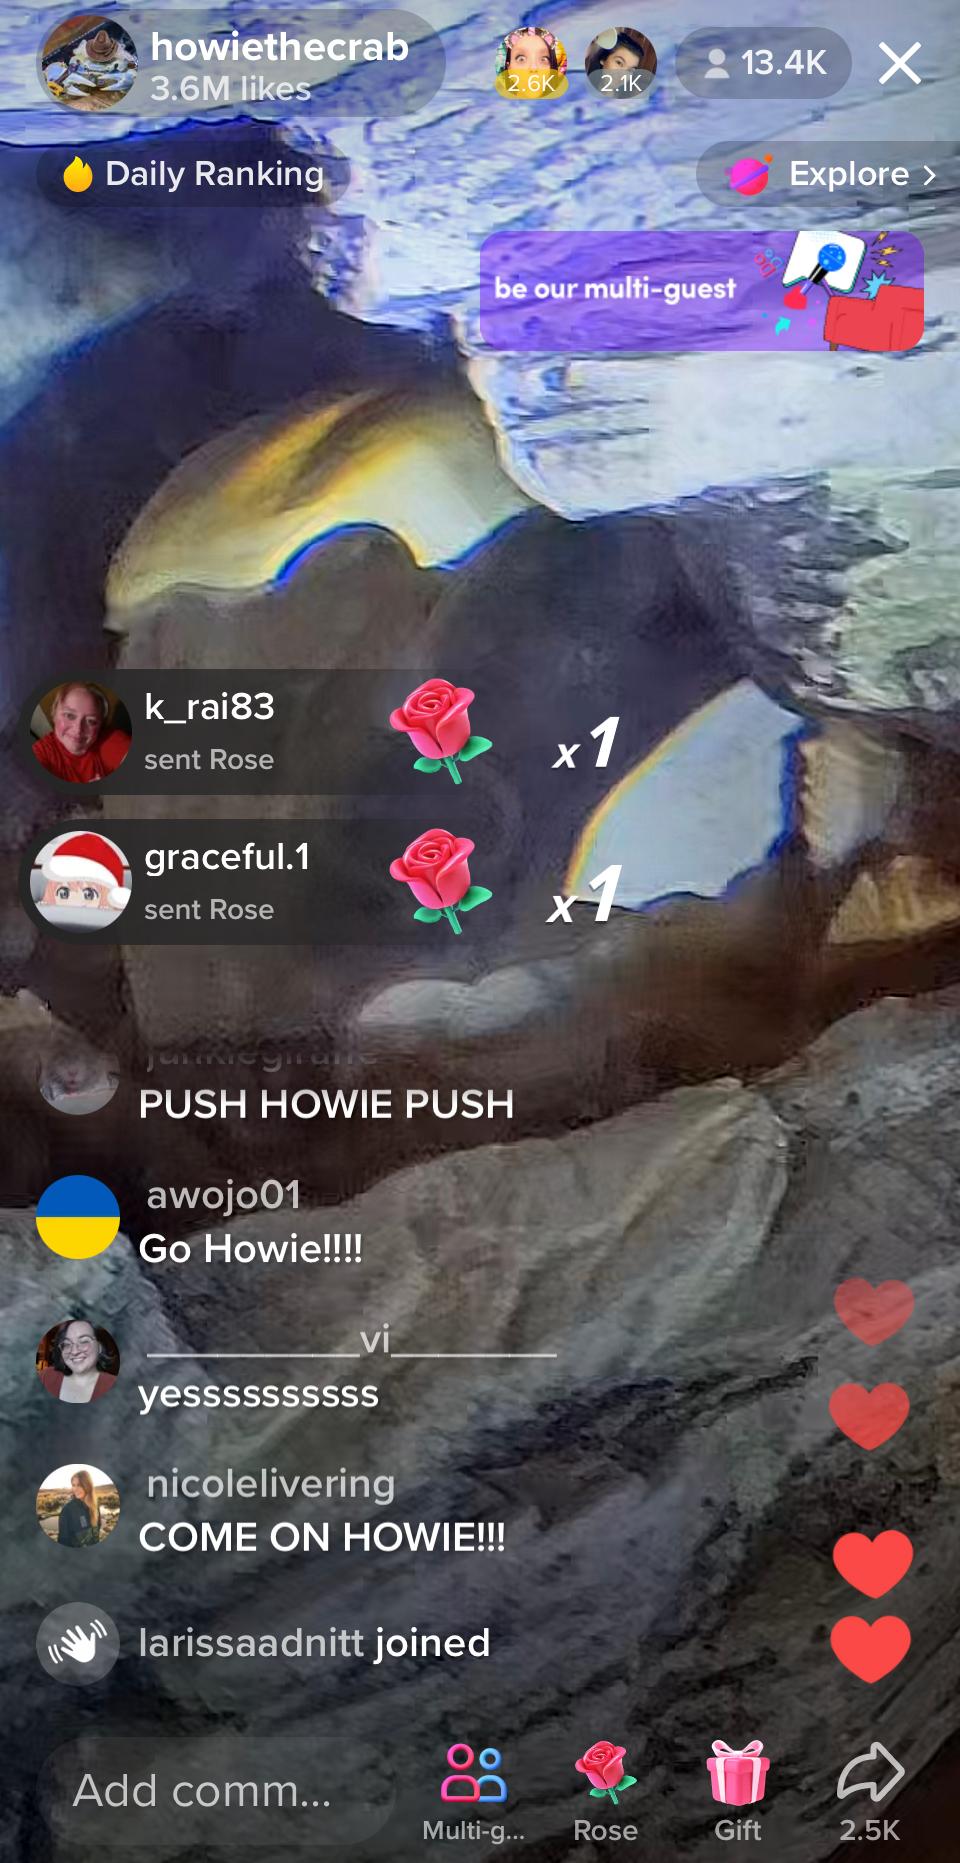 Howie the crab molts live on TikTok